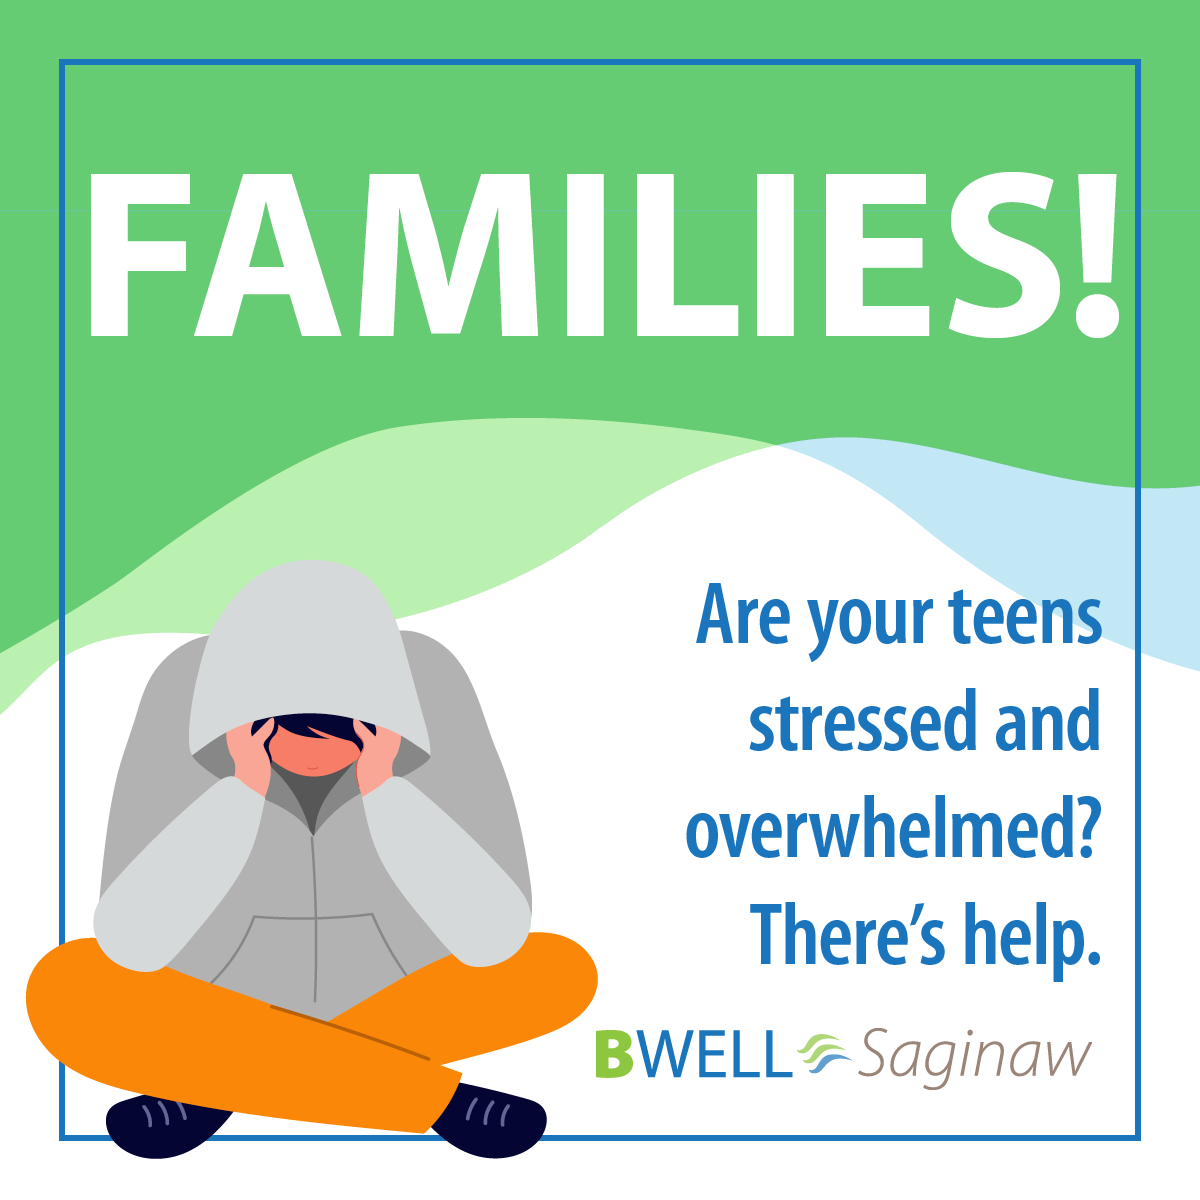 #1: Families: Are your teens  stressed and overwhelmed?